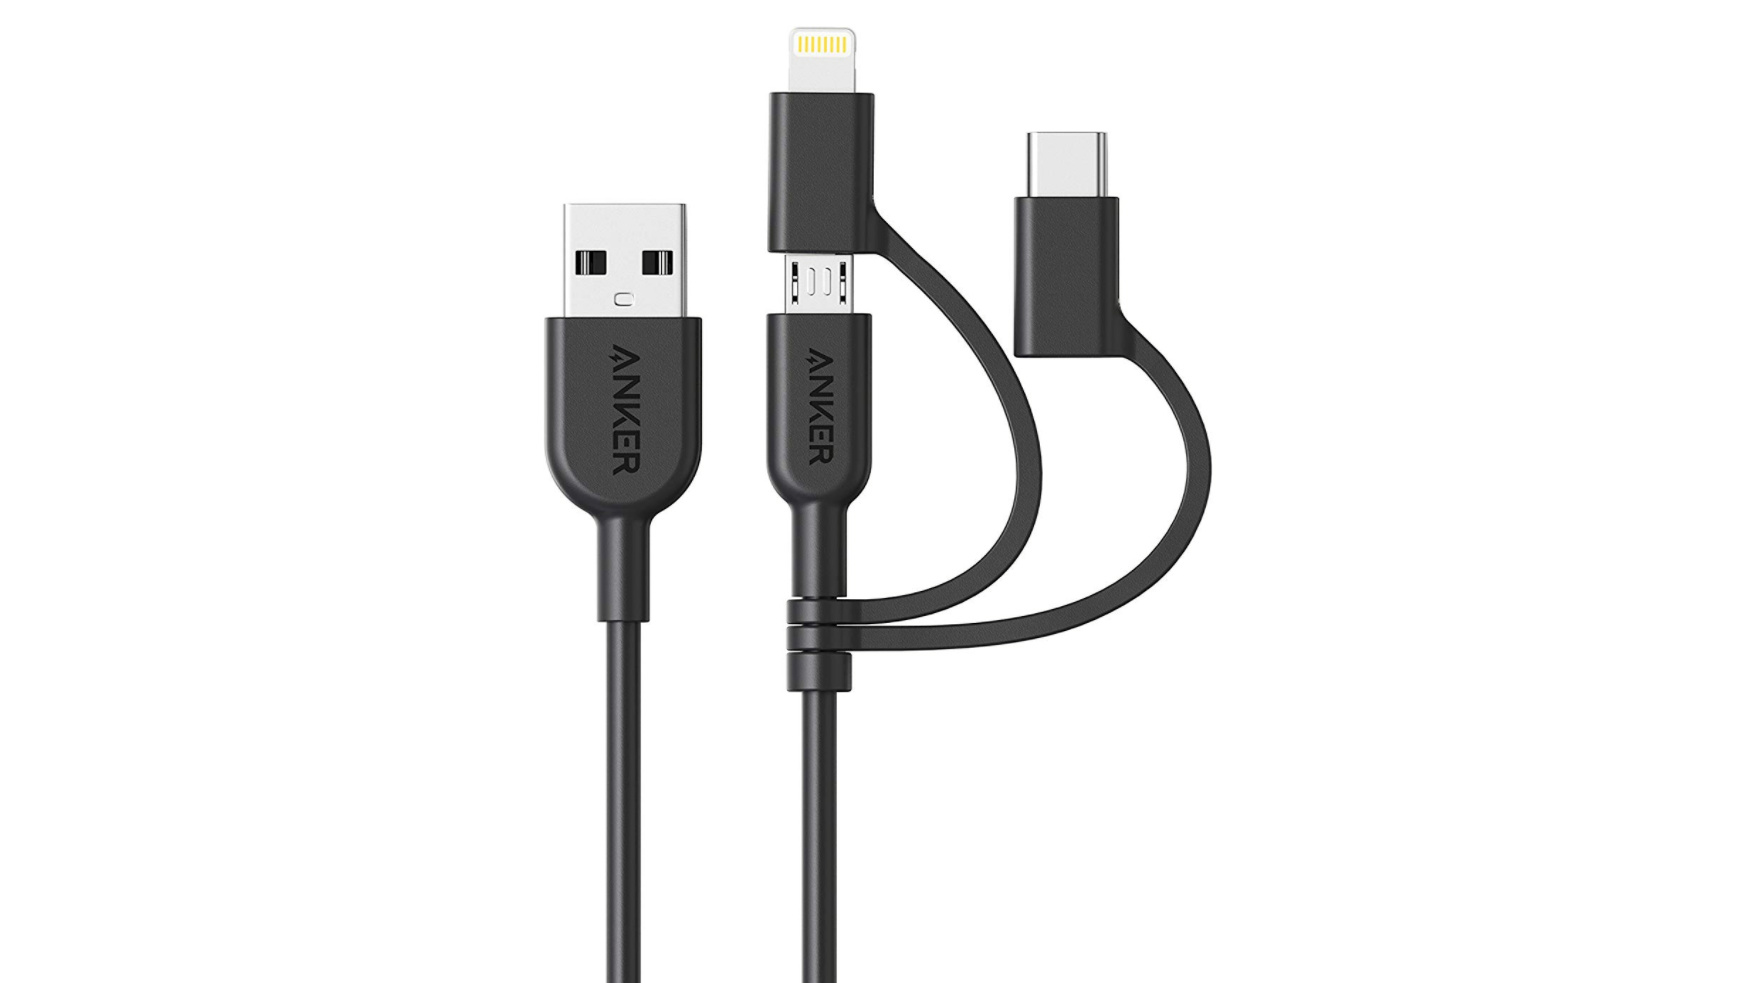 Anker Powerline II 3 in 1 cable